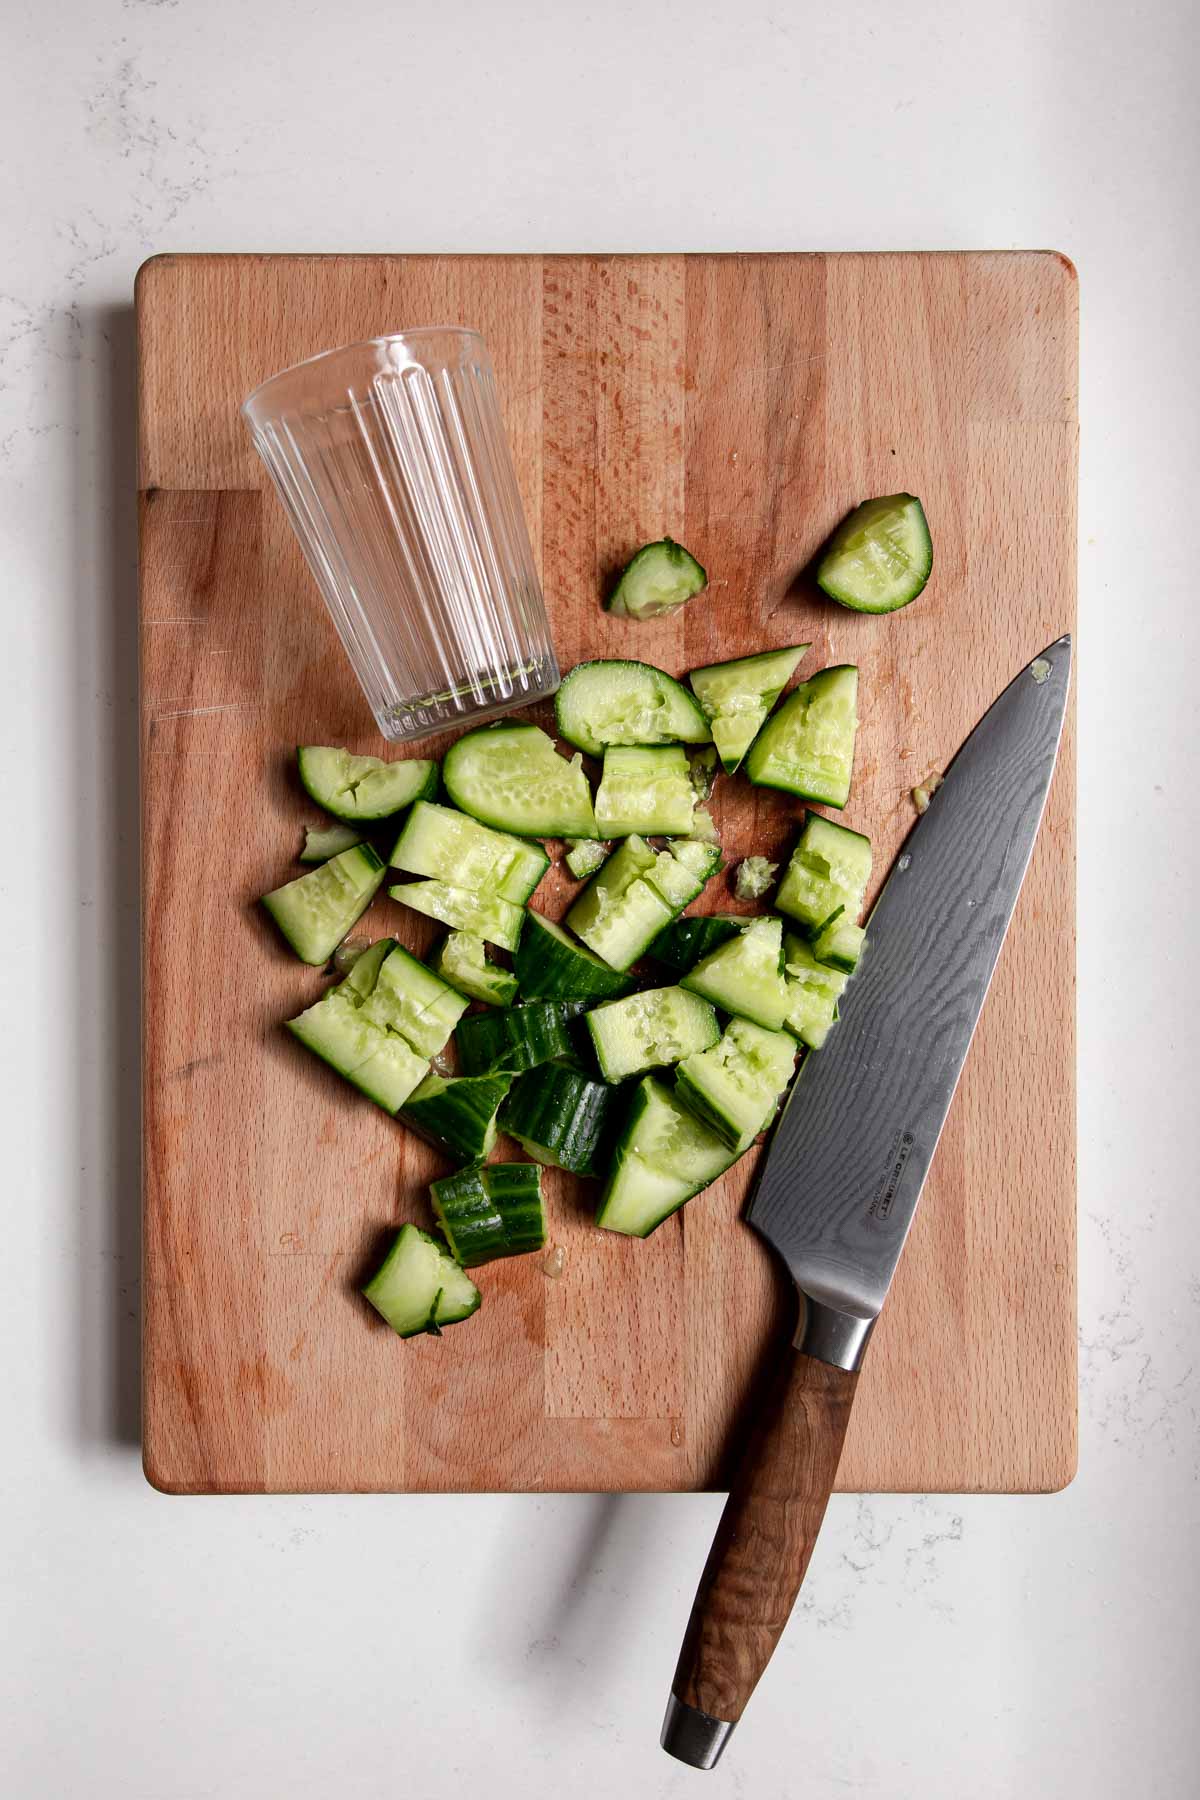 Smashed cucumbers on a cutting board with a knife and glass.